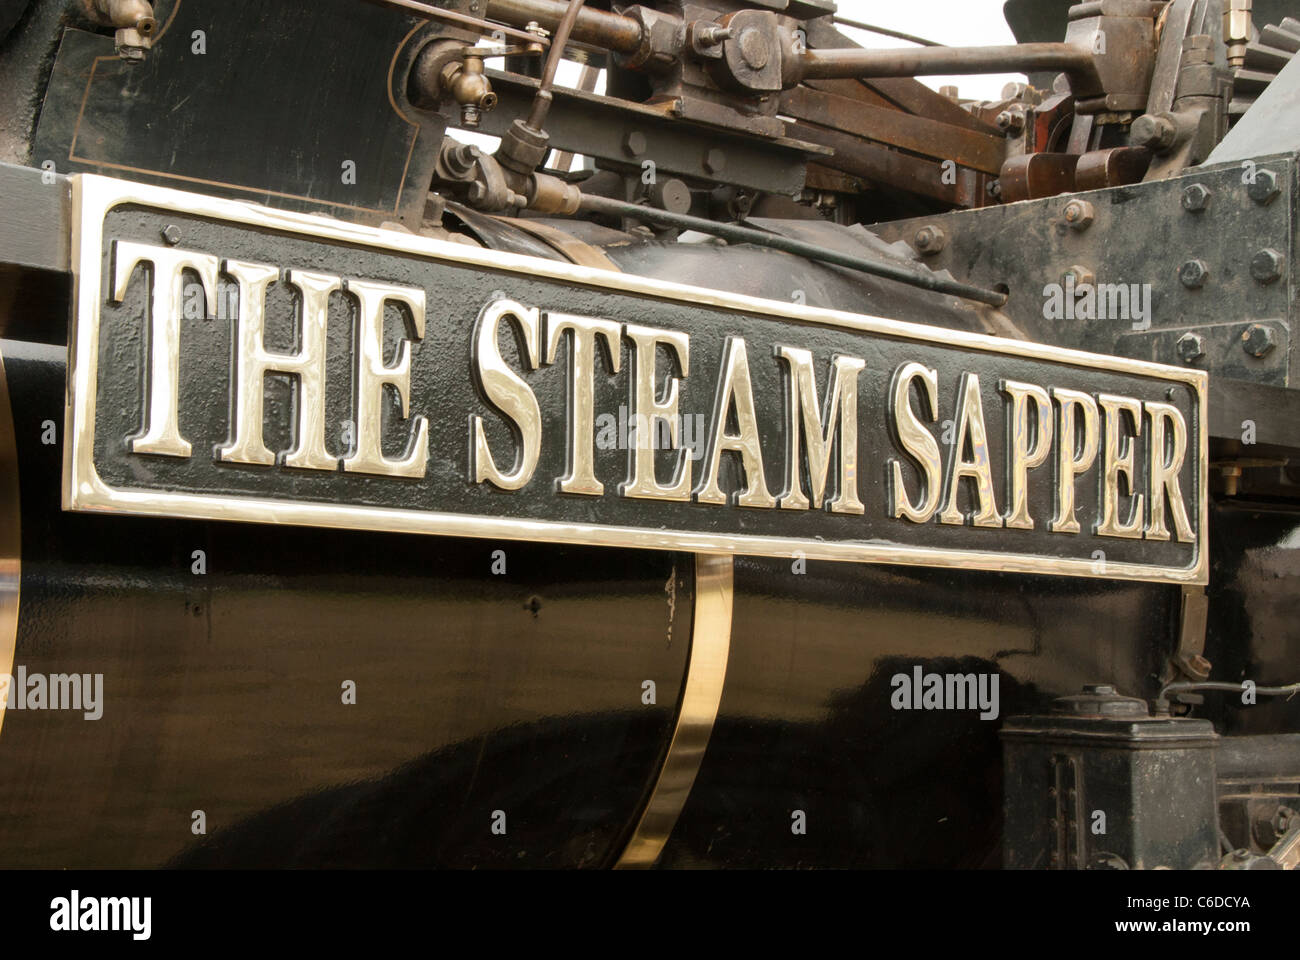 Close up of the name plate of a traction engine called The Steam Sapper Stock Photo